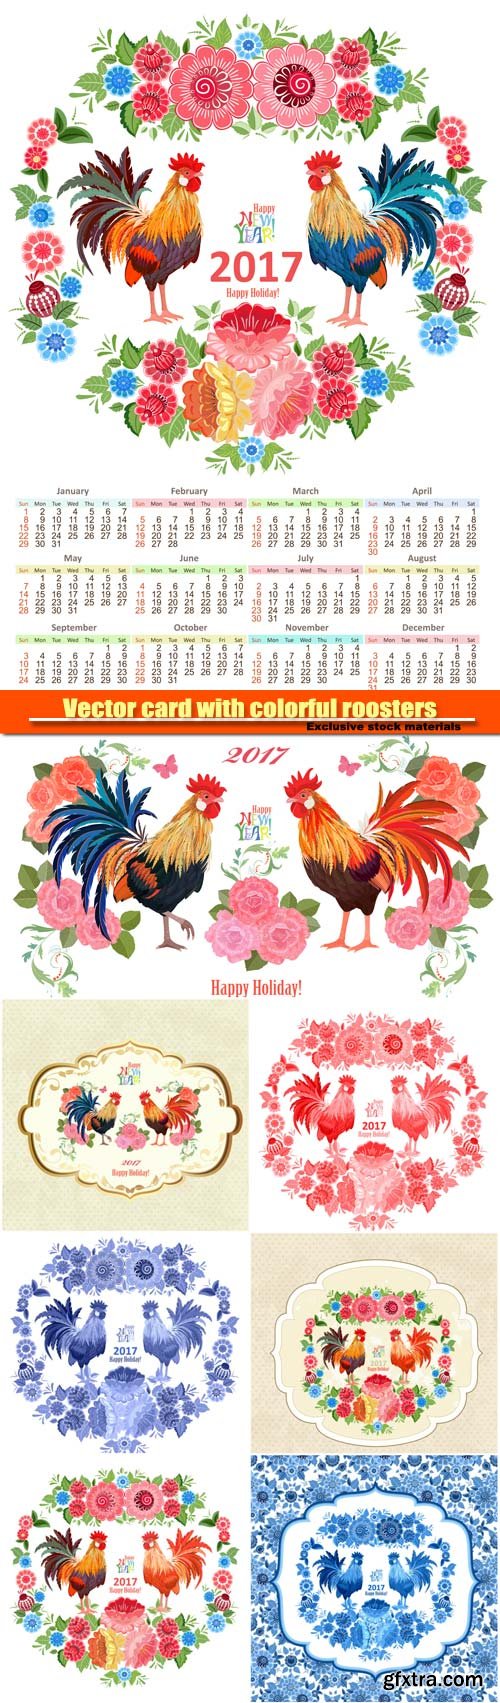 Vector card with colorful roosters and flowers, the calendars for 2017